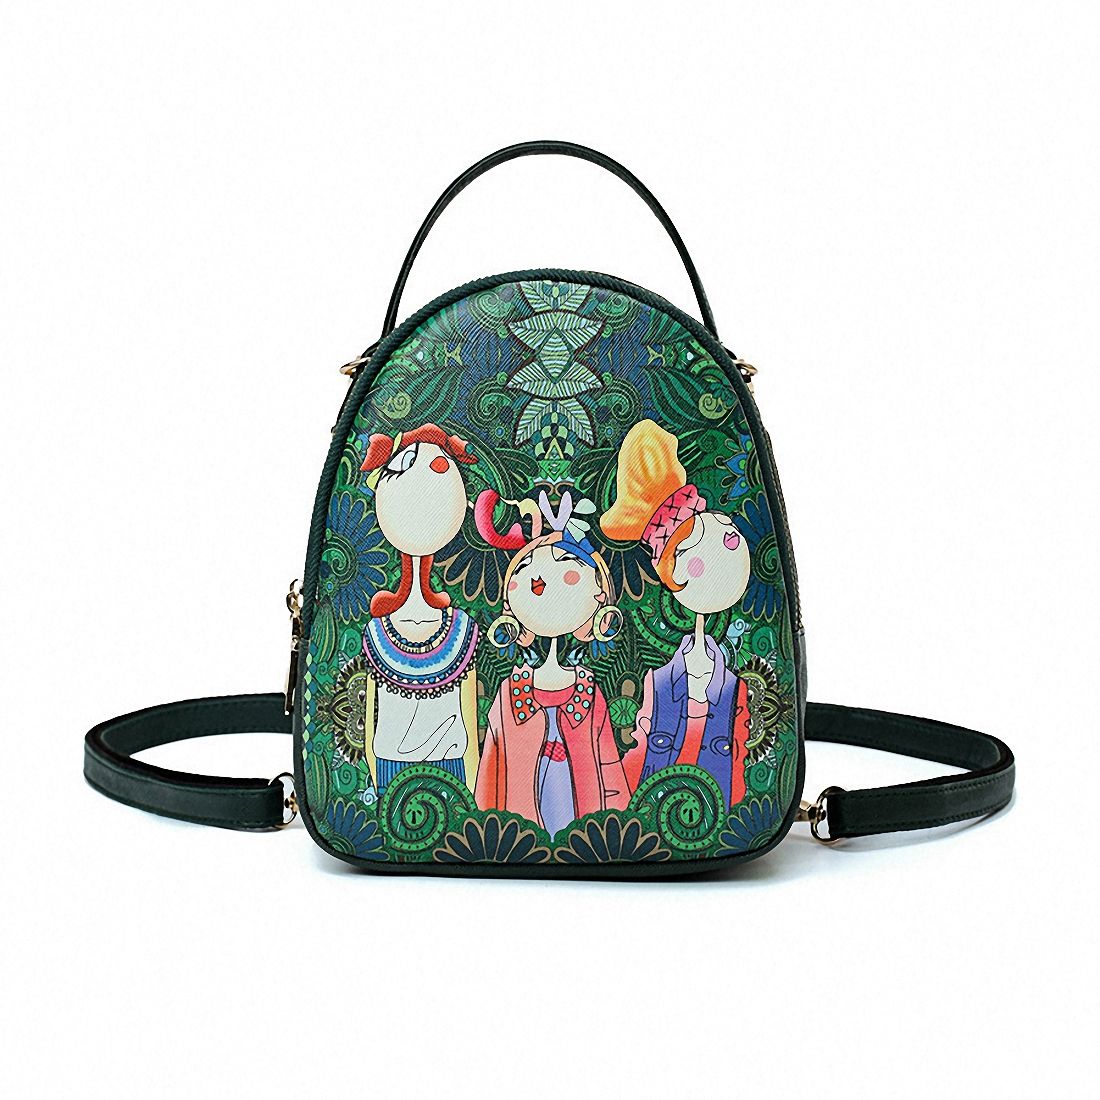 Ms. bag quilting forest girl printing green PU leather fashion trend shoulder bag - ebowsos